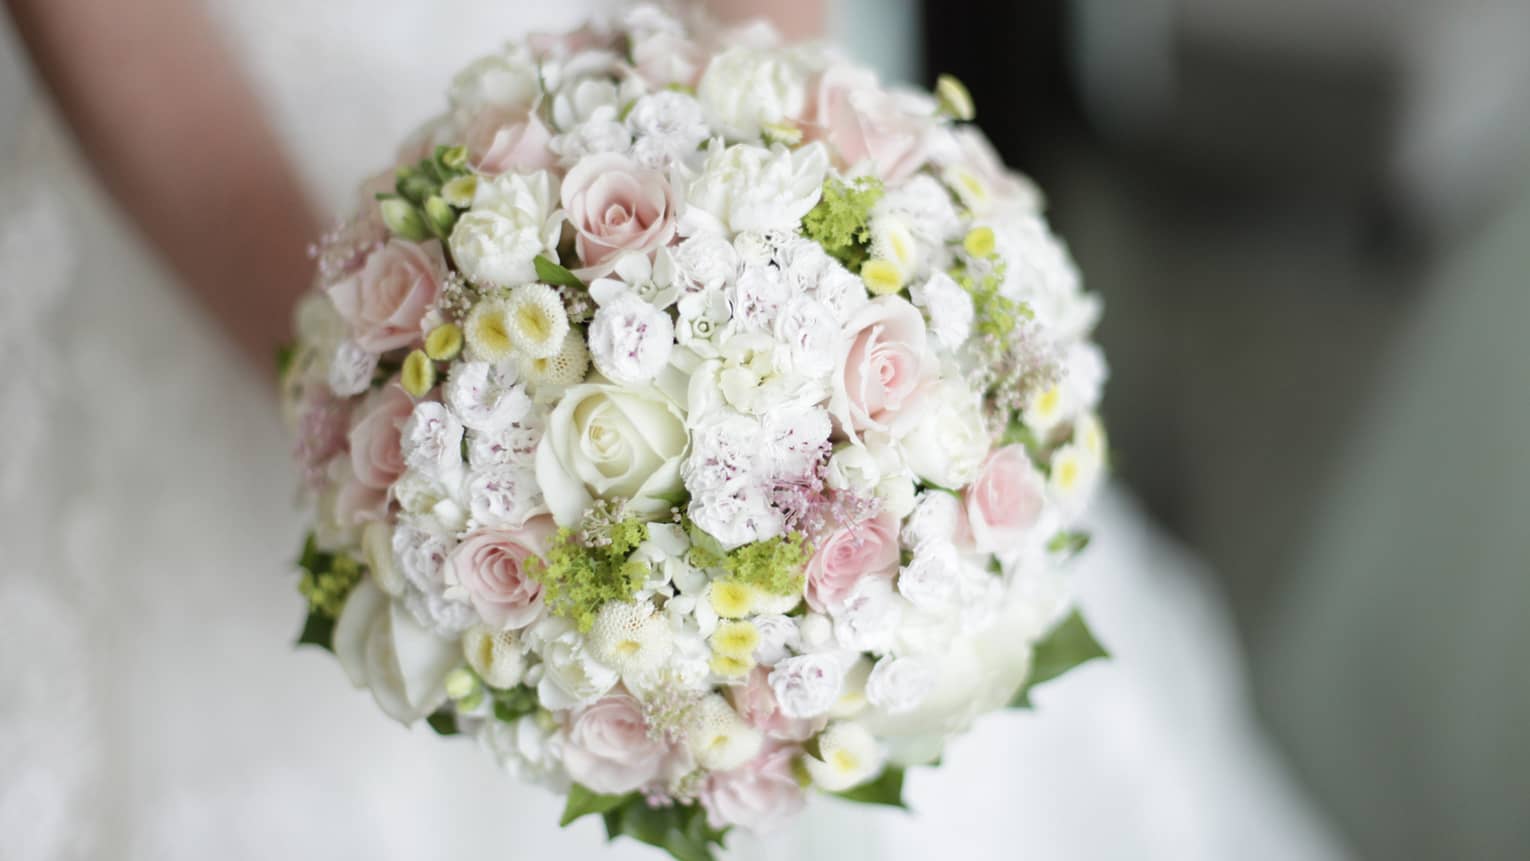 Round floral wedding bouquet with small white and pink roses 